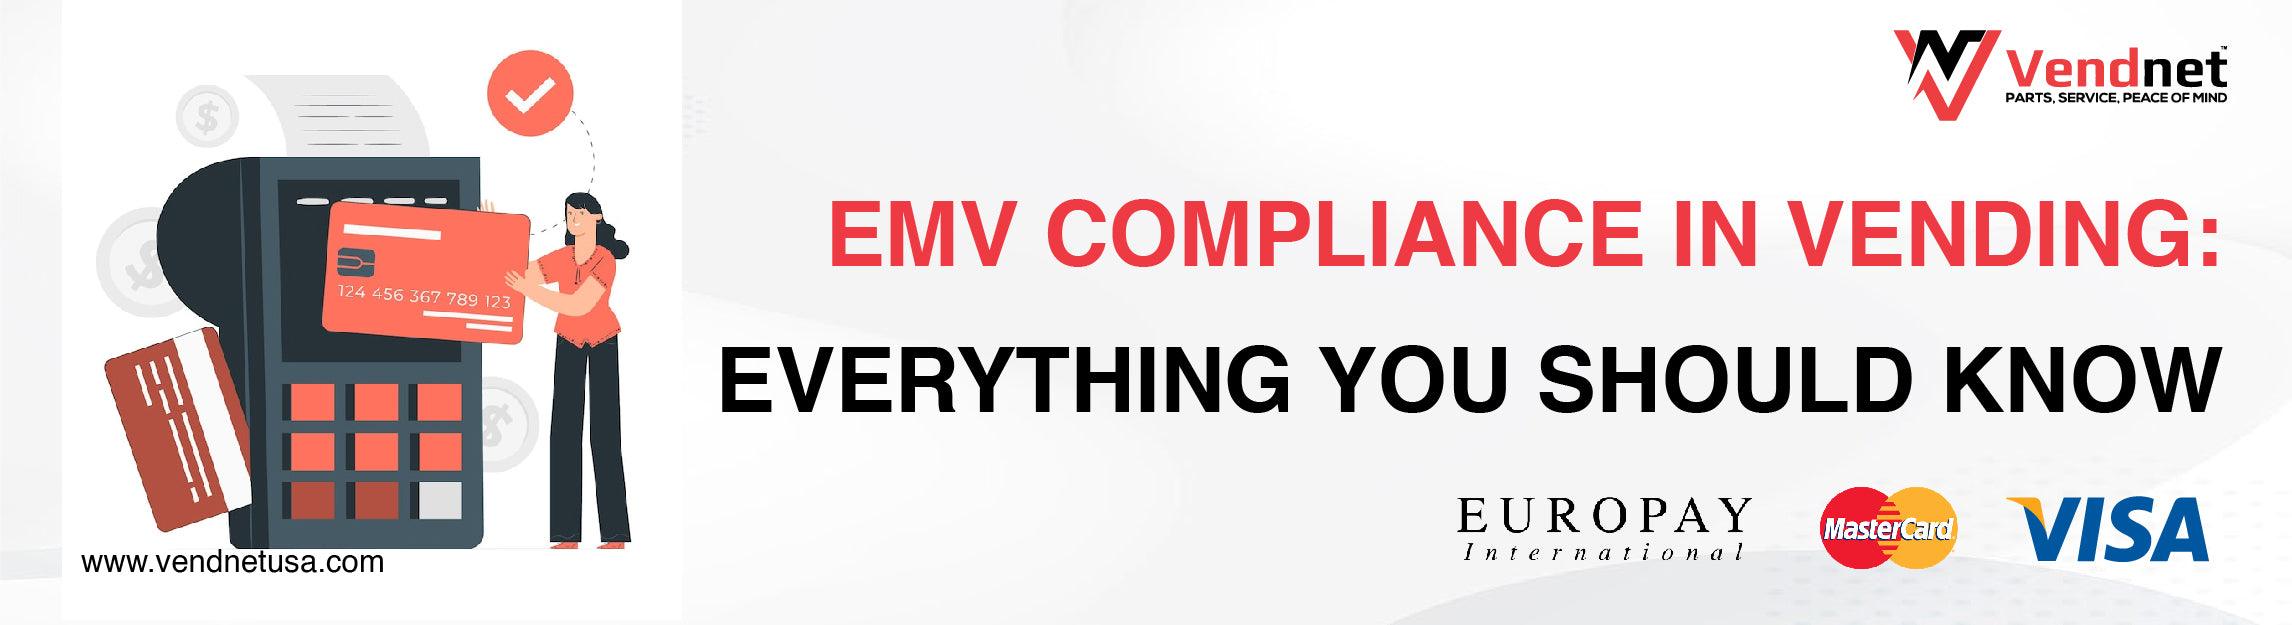 EMV Compliance in Vending: Everything You Should Know - Vendnet